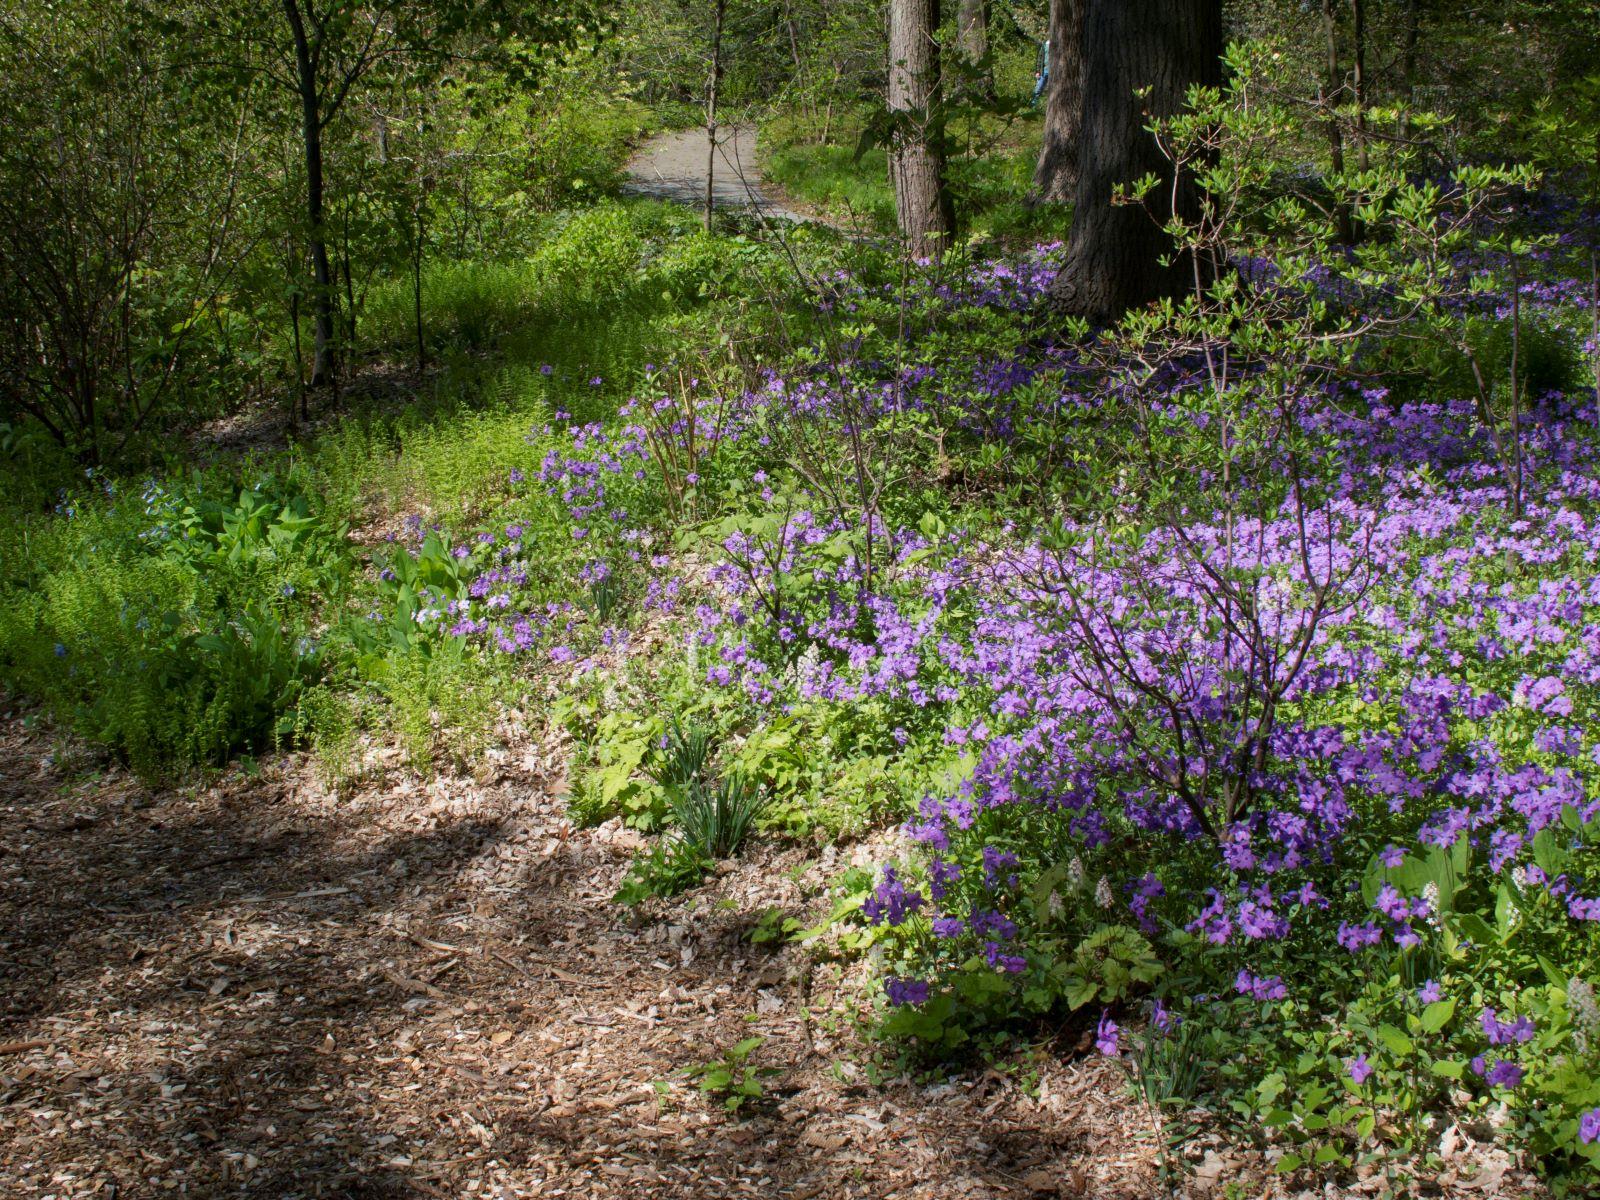 purple flowers blooming in a woodland garden - phlox is used as a groundcover